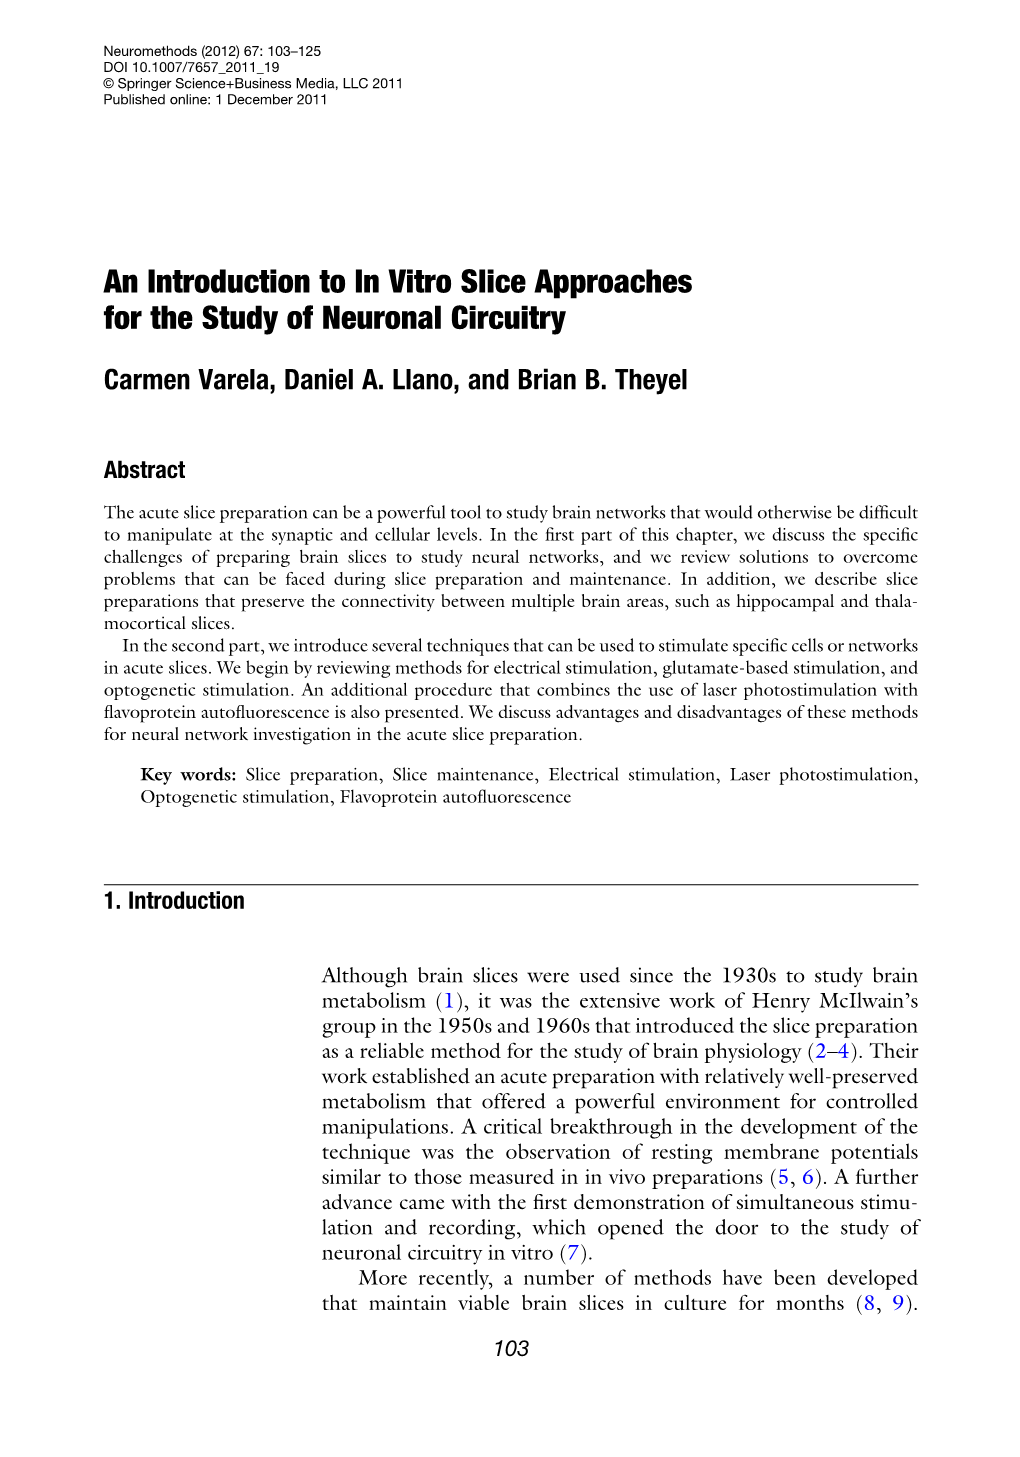 An Introduction to in Vitro Slice Approaches for the Study of Neuronal Circuitry